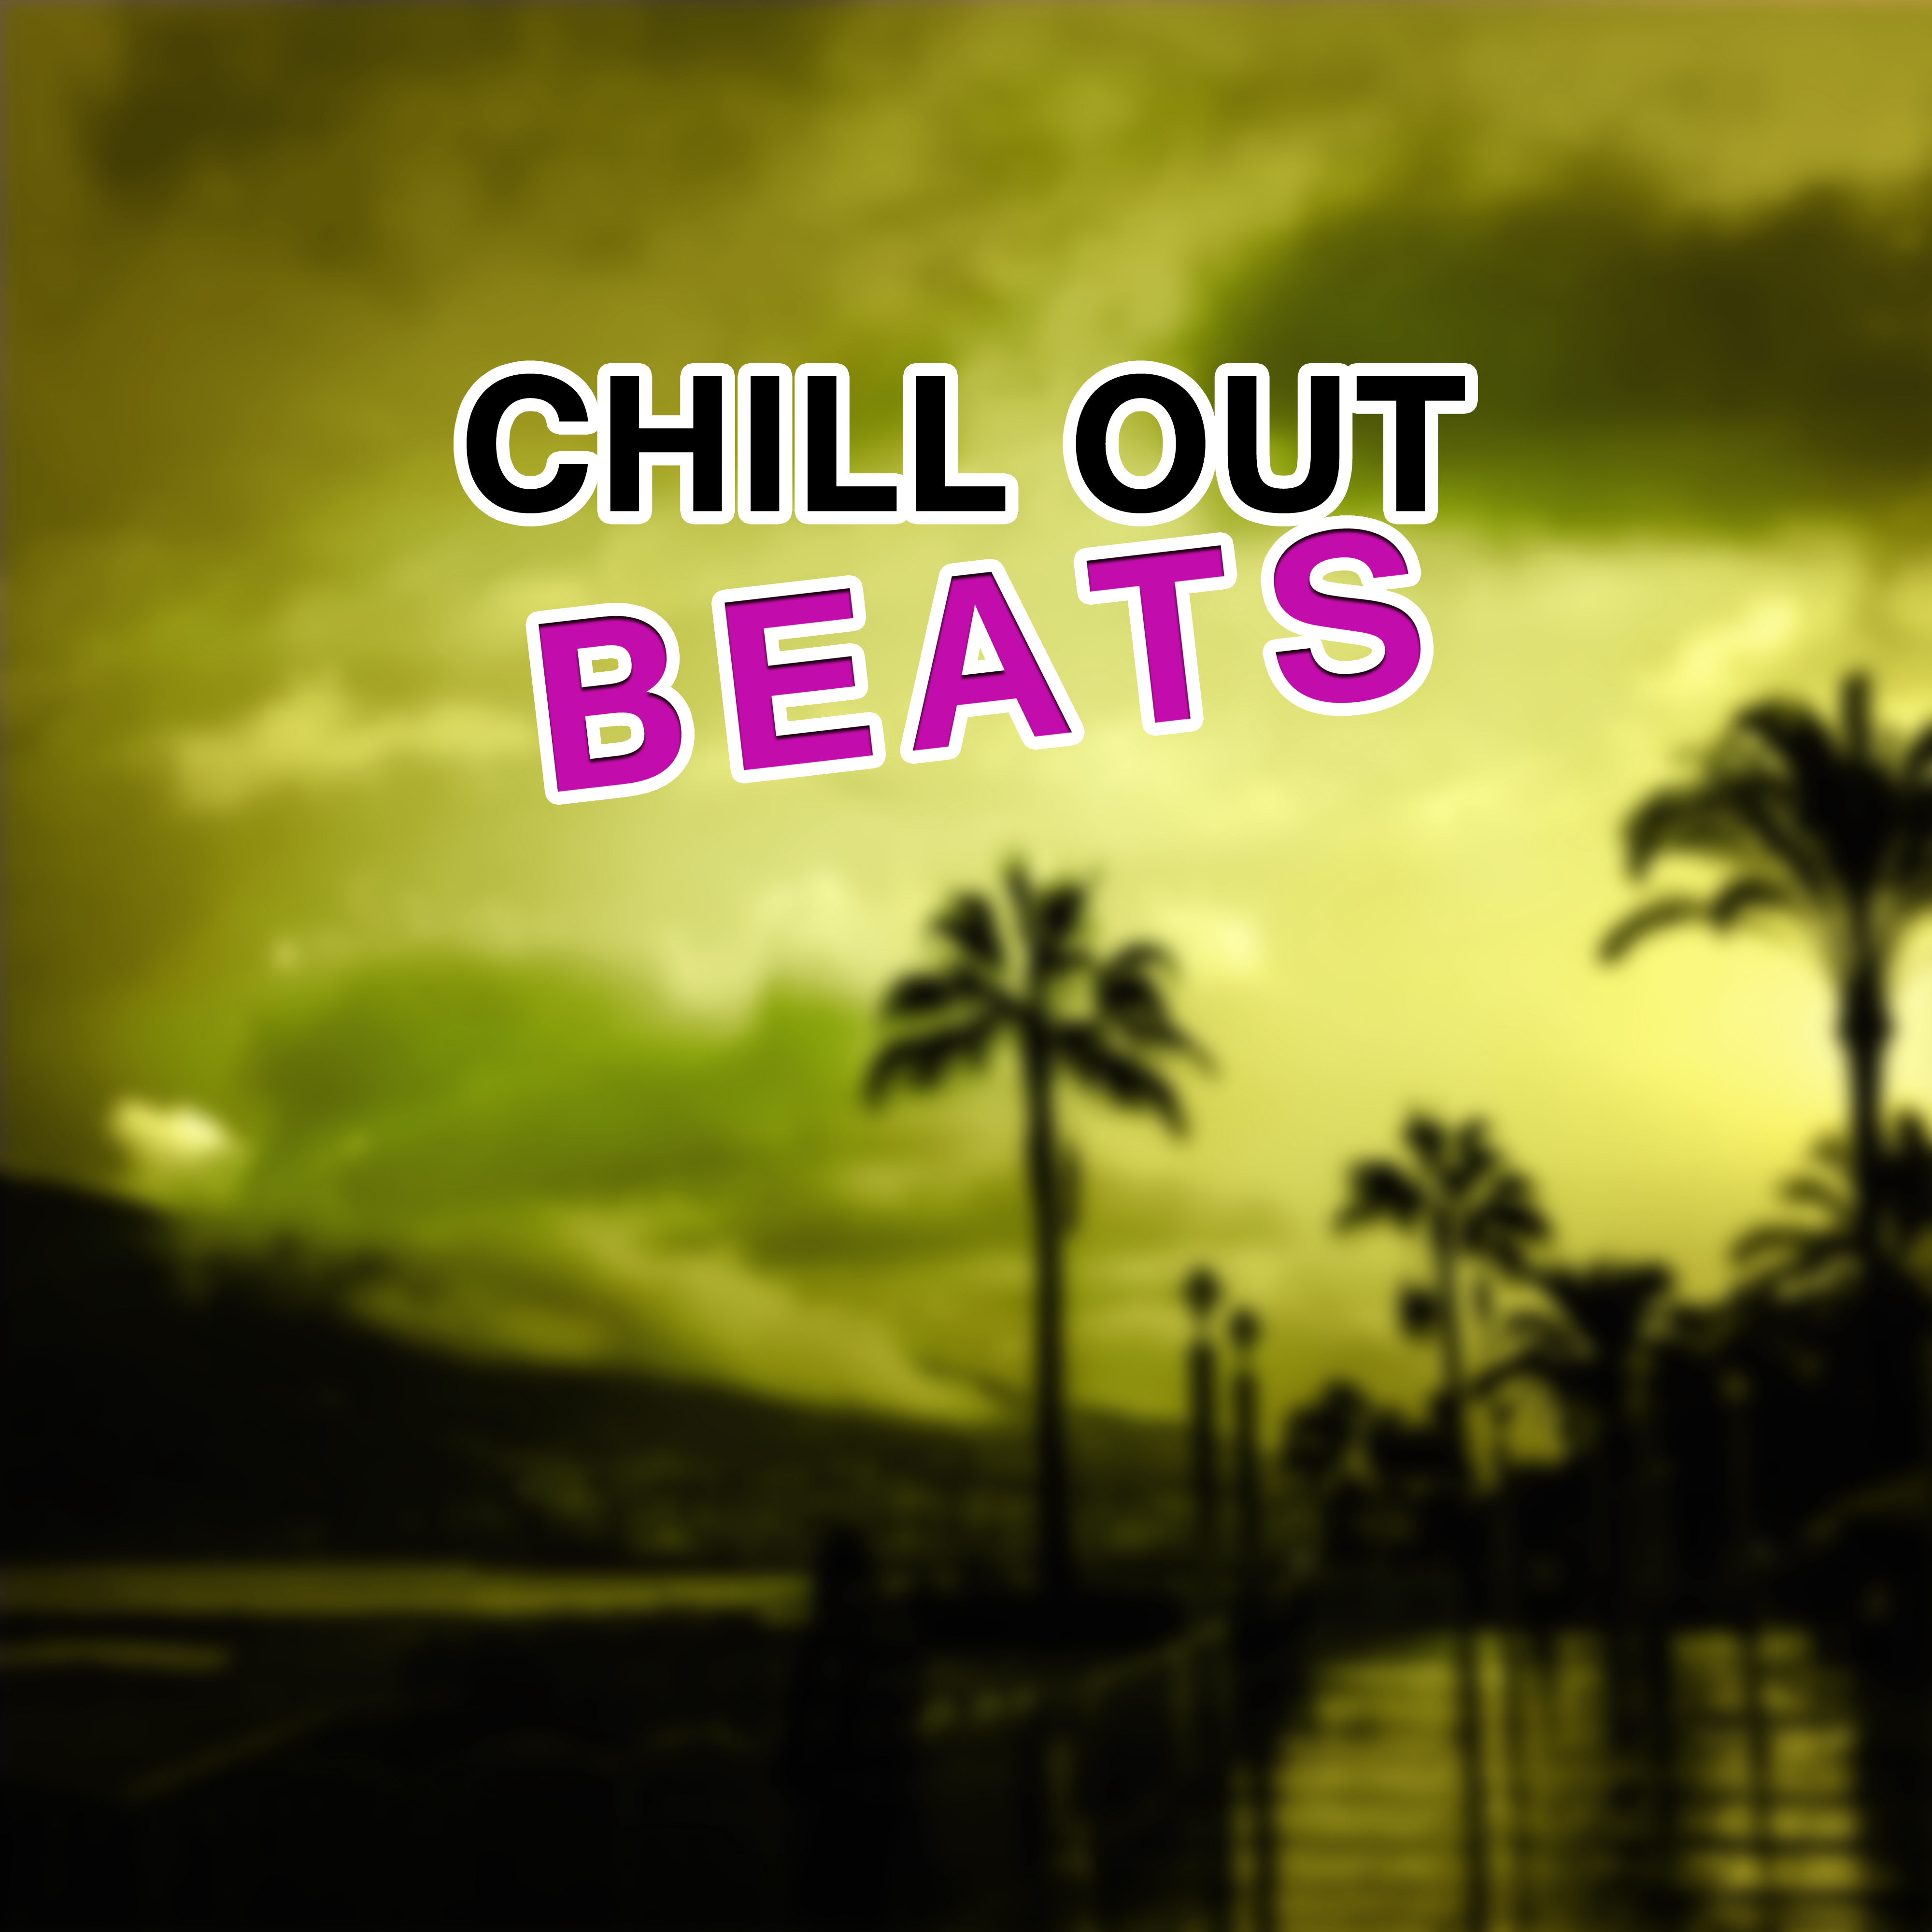 Chill Out Beats – Ibiza Hits, Chill Out 2017, Lounge, Relax, Summer Music, Sunset